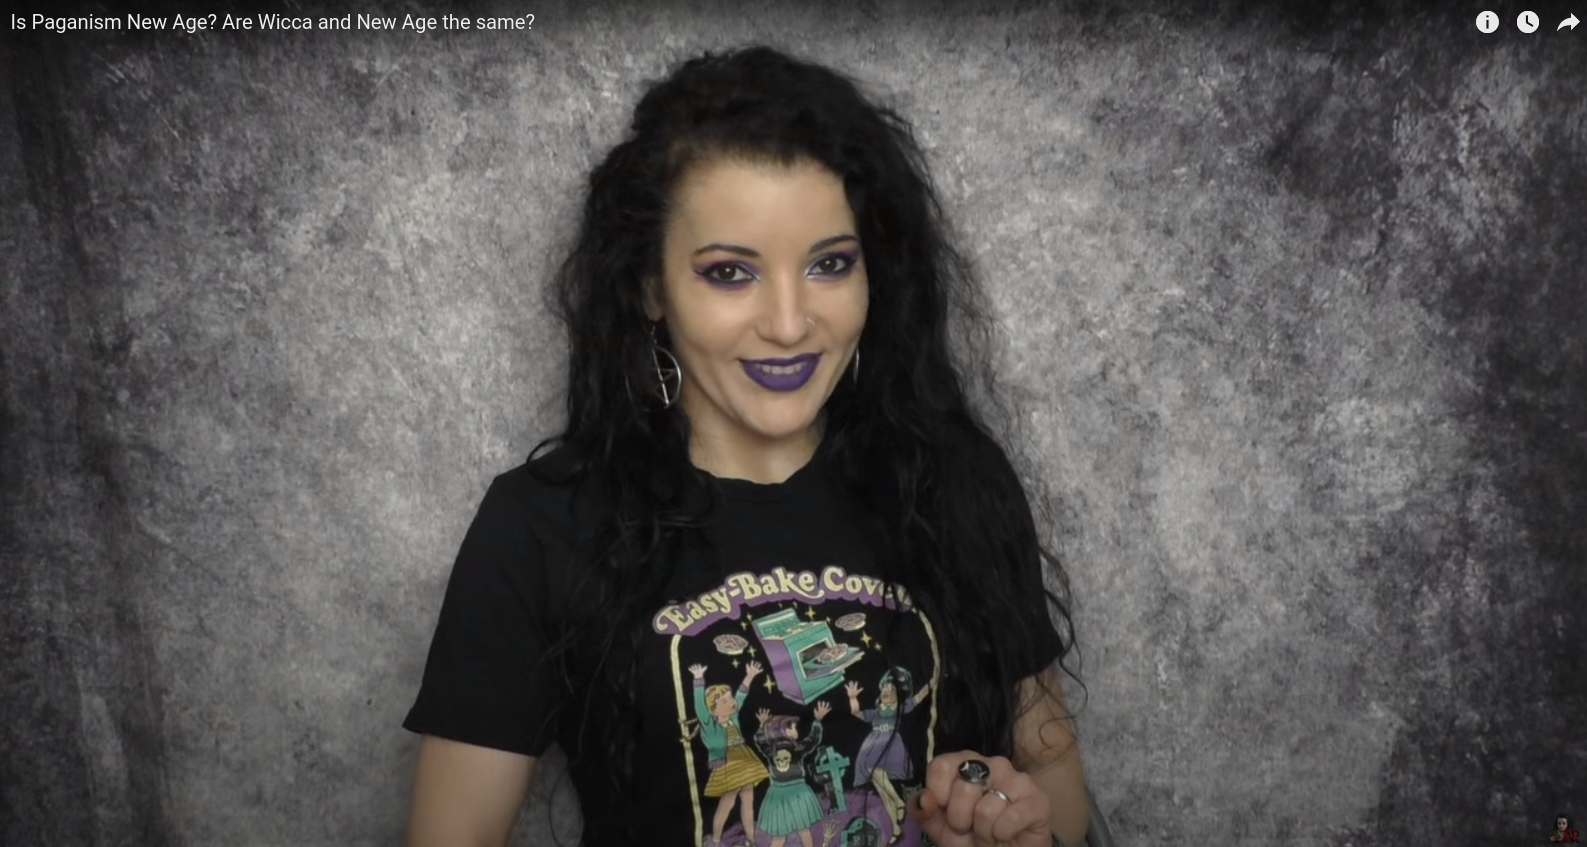 Angela Puca wearing a black T-shirt with the words "Easy Bake Coven" and a cartoon